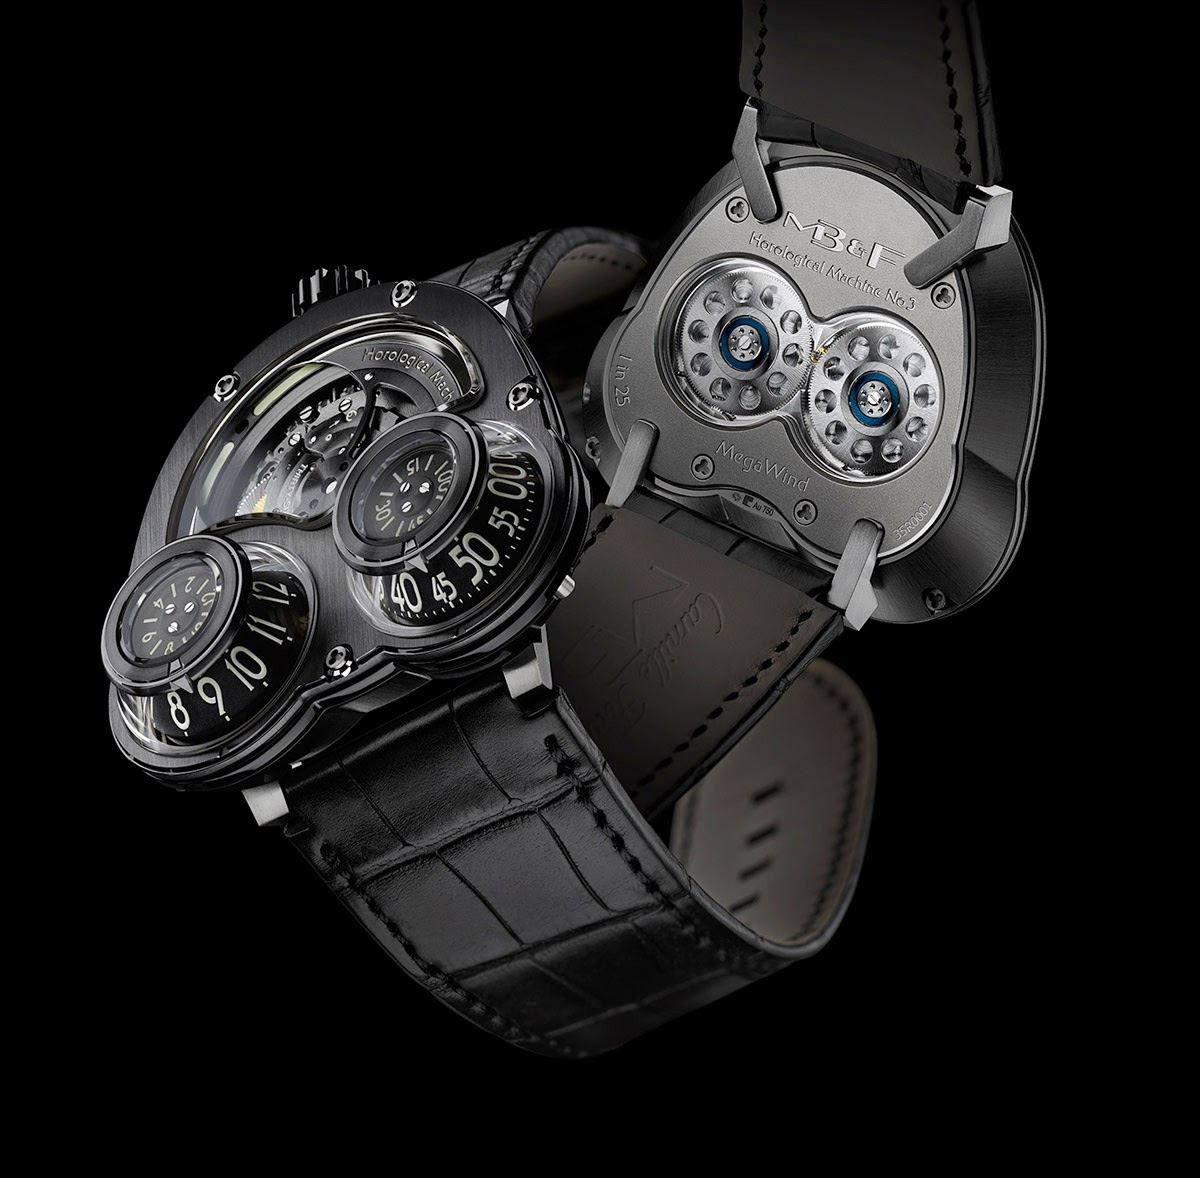 Limited Edition Watch Series:MB&F HM3 Megawind Final Replica